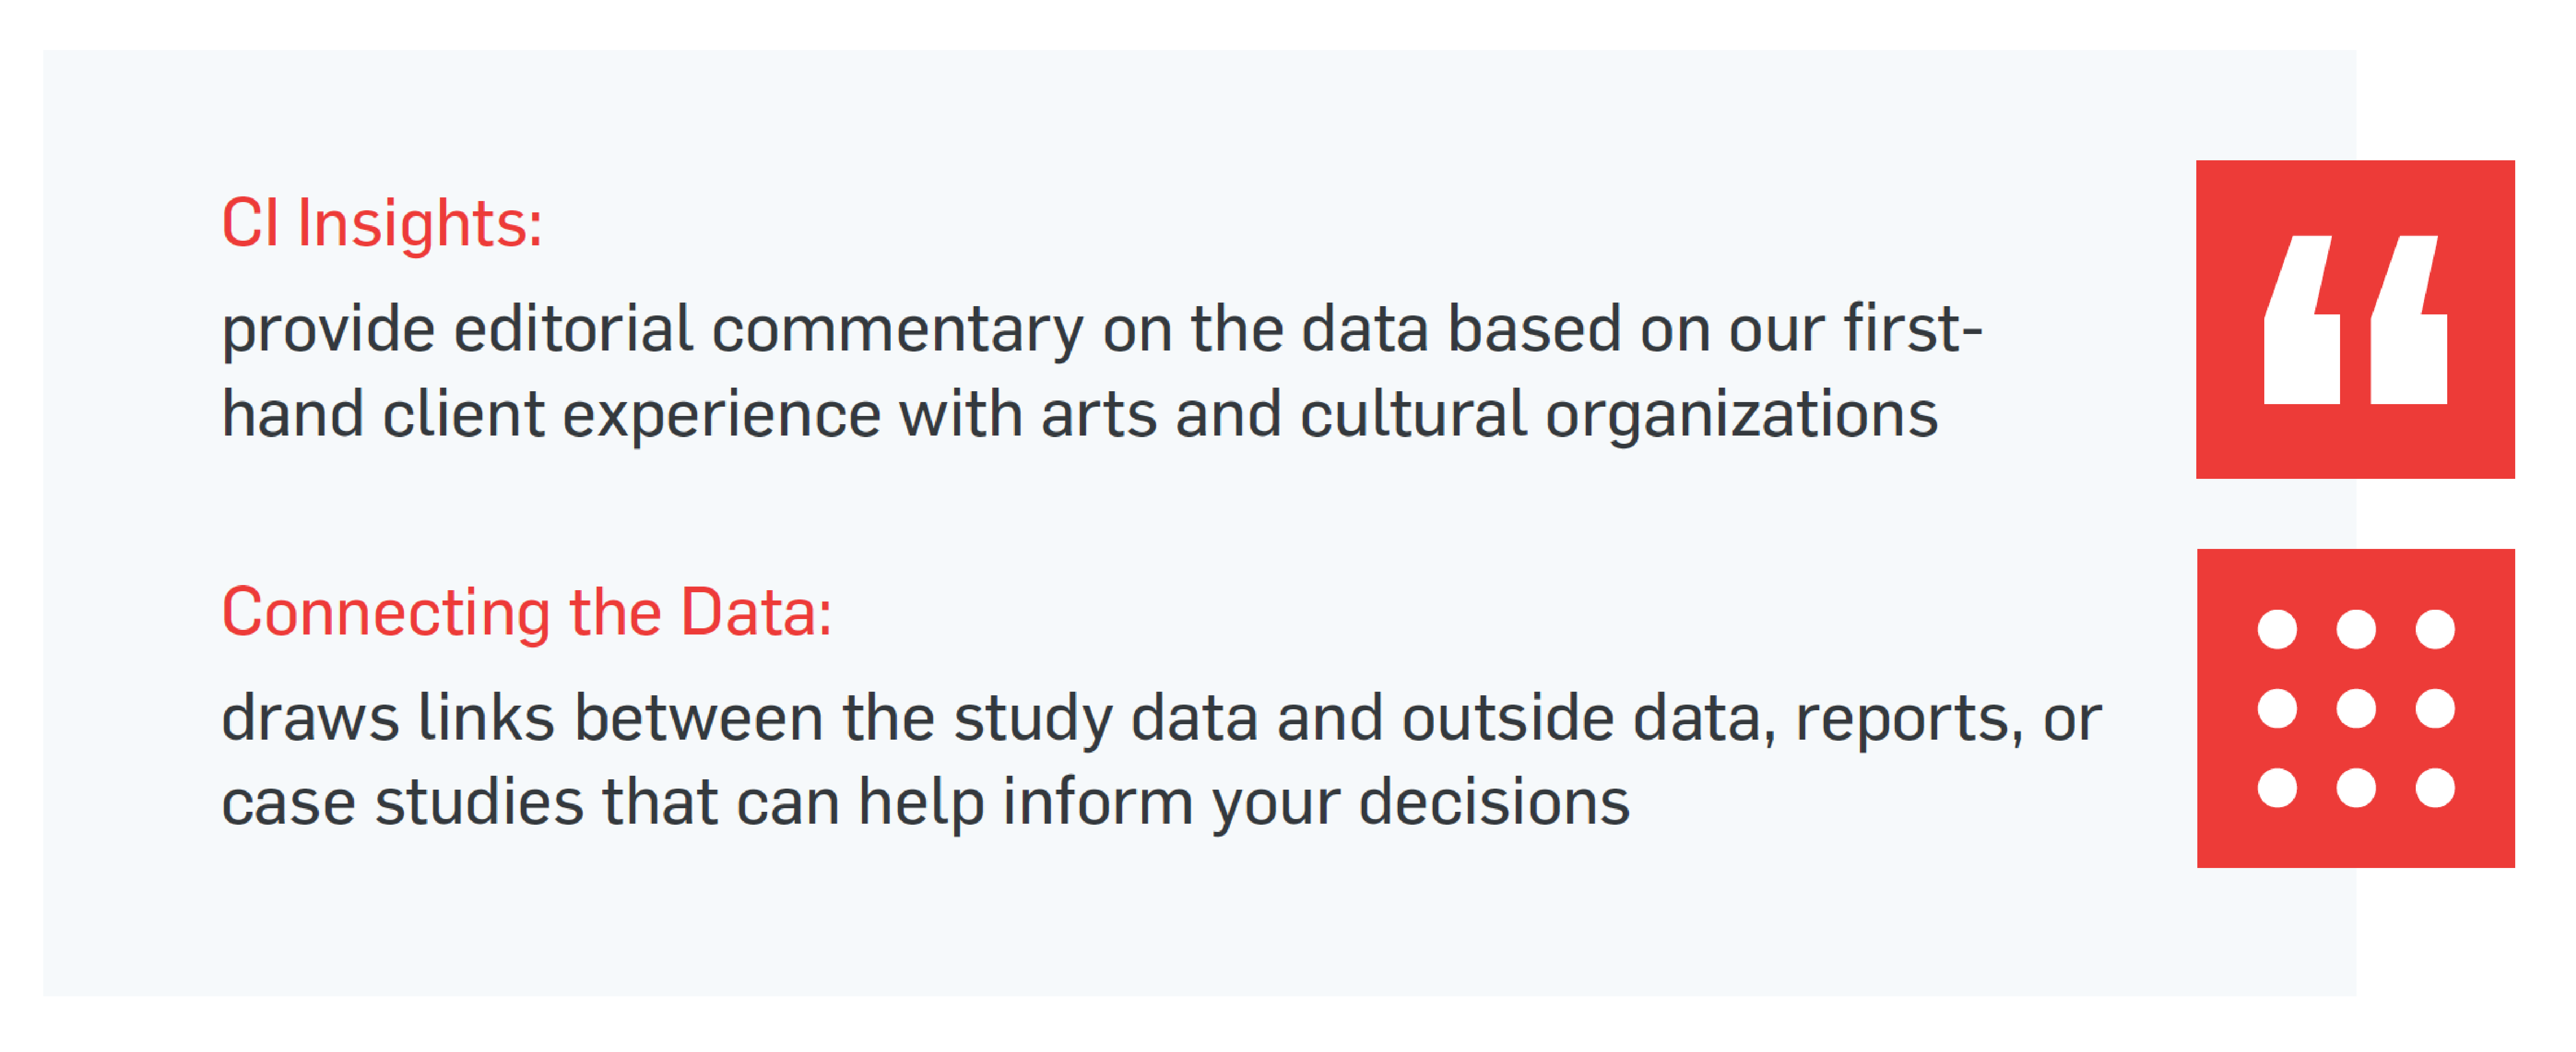 CI Insights: provide editorial commentary on the data based on our first-hand client experience with arts and cultural organizations | Connecting the Data: draws links between the study data and outside data, reports, or case studies that can help inform your decisions